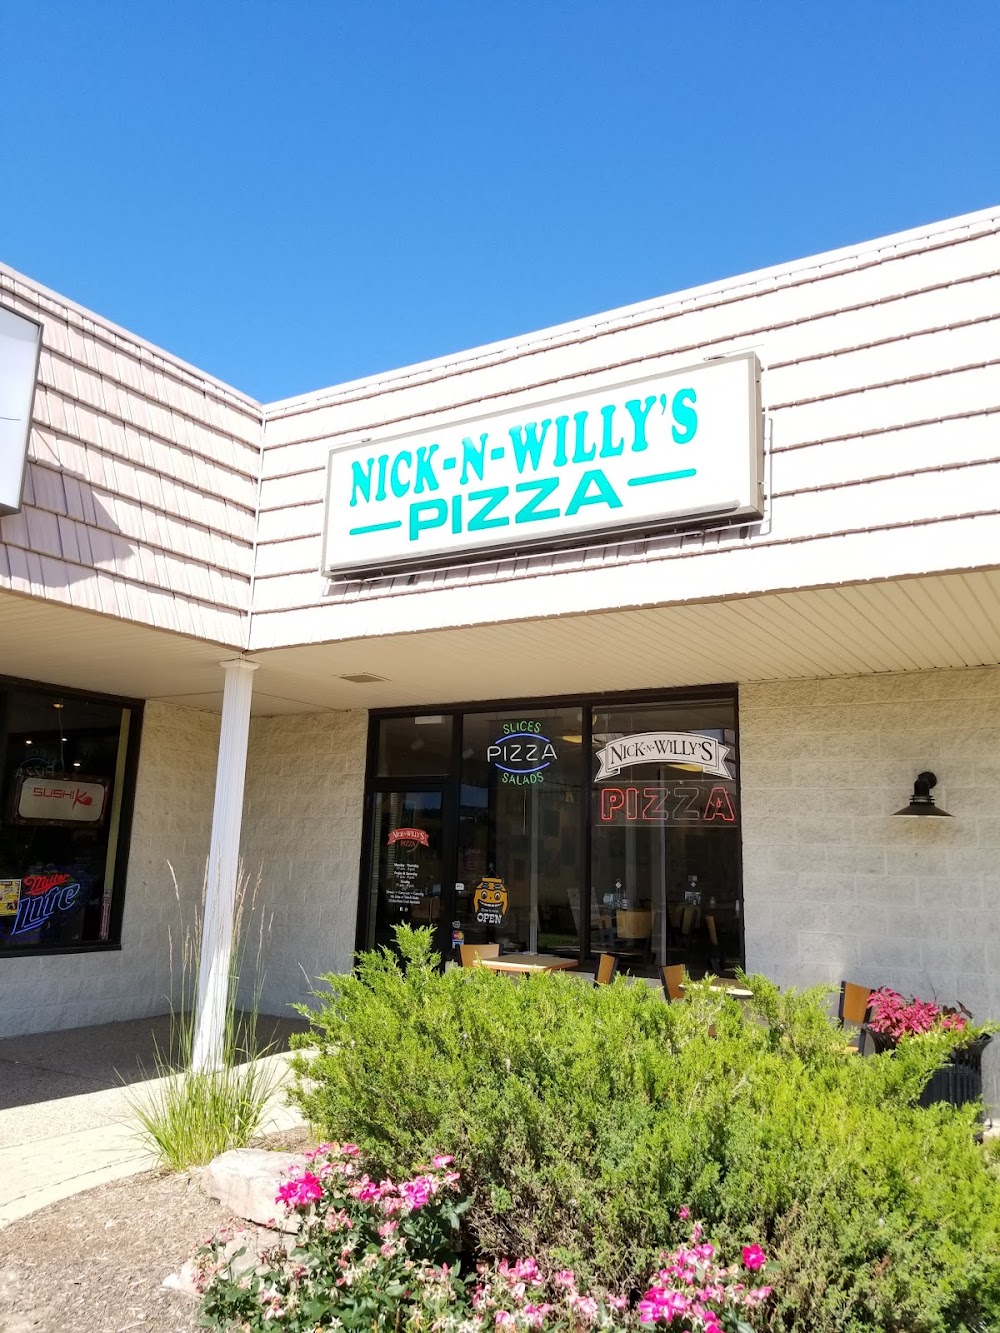 Nick-N-Willy’s Pizza Peoria